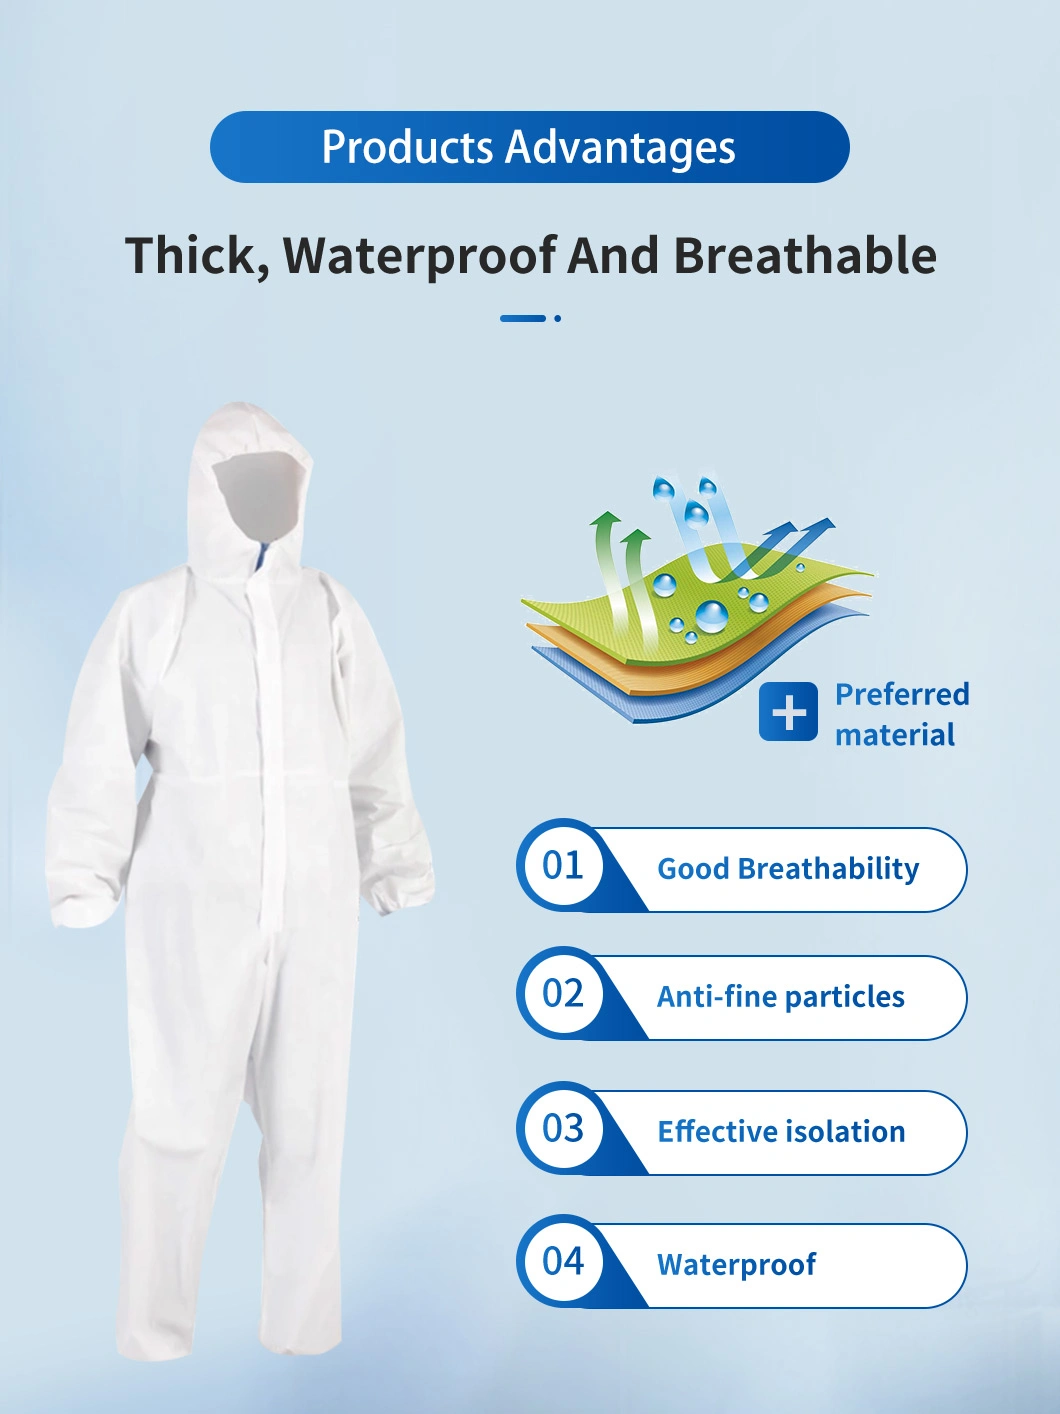 Factory FDA Registration Disposable Isolation Gown Coveral Protective Clothing Protection Suit Hooded